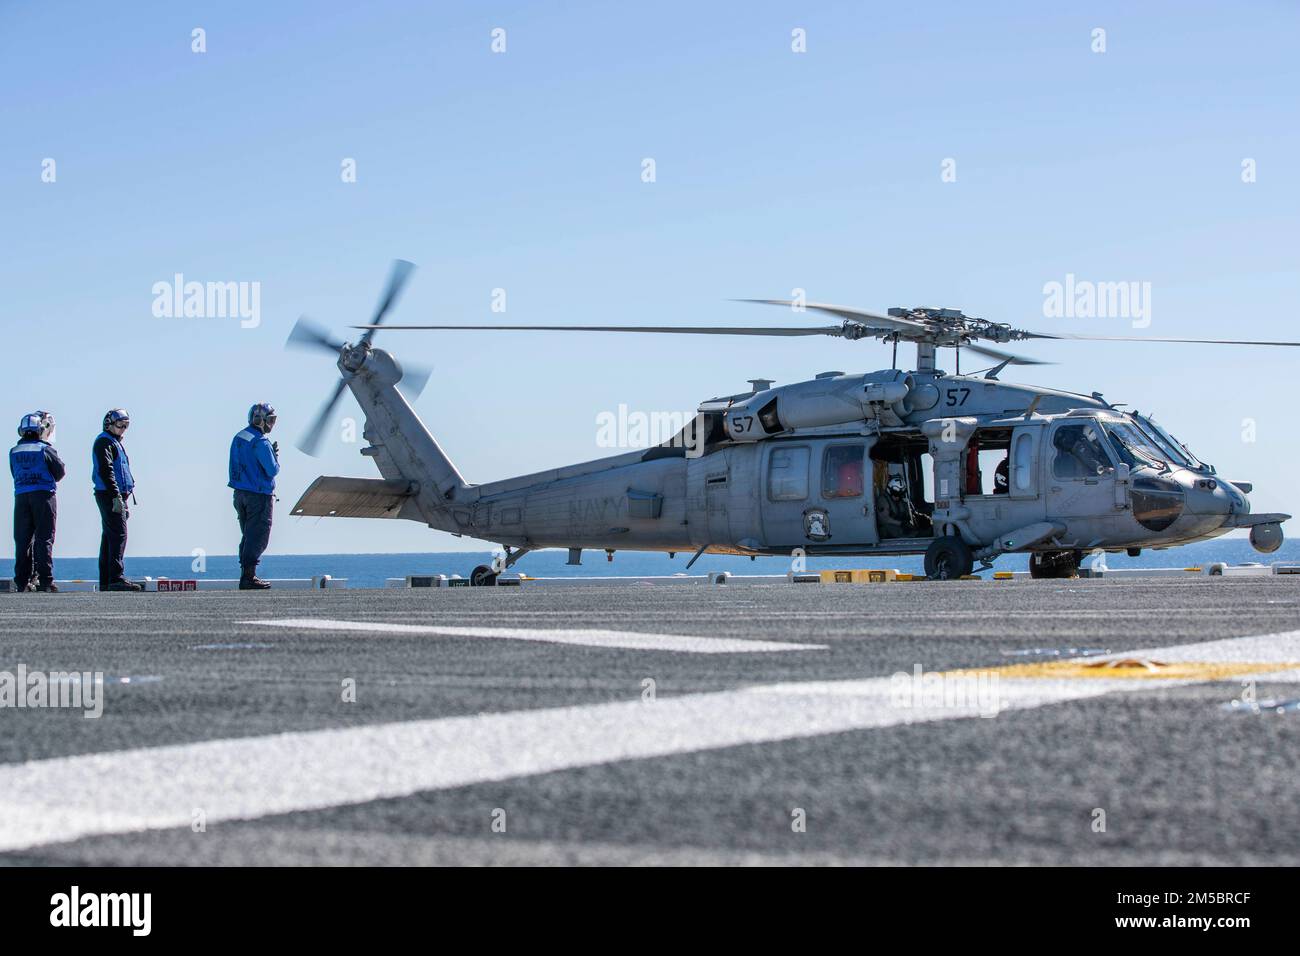 220224-N-CZ759-2016 PACIFIC OCEAN (Feb. 24, 2022) – Sailors prepare an MH-60S Sea Hawk helicopter, assigned to Helicopter Sea Combat Squadron (HSC) 23, for take-off on the flight deck of amphibious assault ship USS Tripoli (LHA 7), Feb. 24. Tripoli is underway conducting routine operations in U.S. 3rd Fleet. Stock Photo